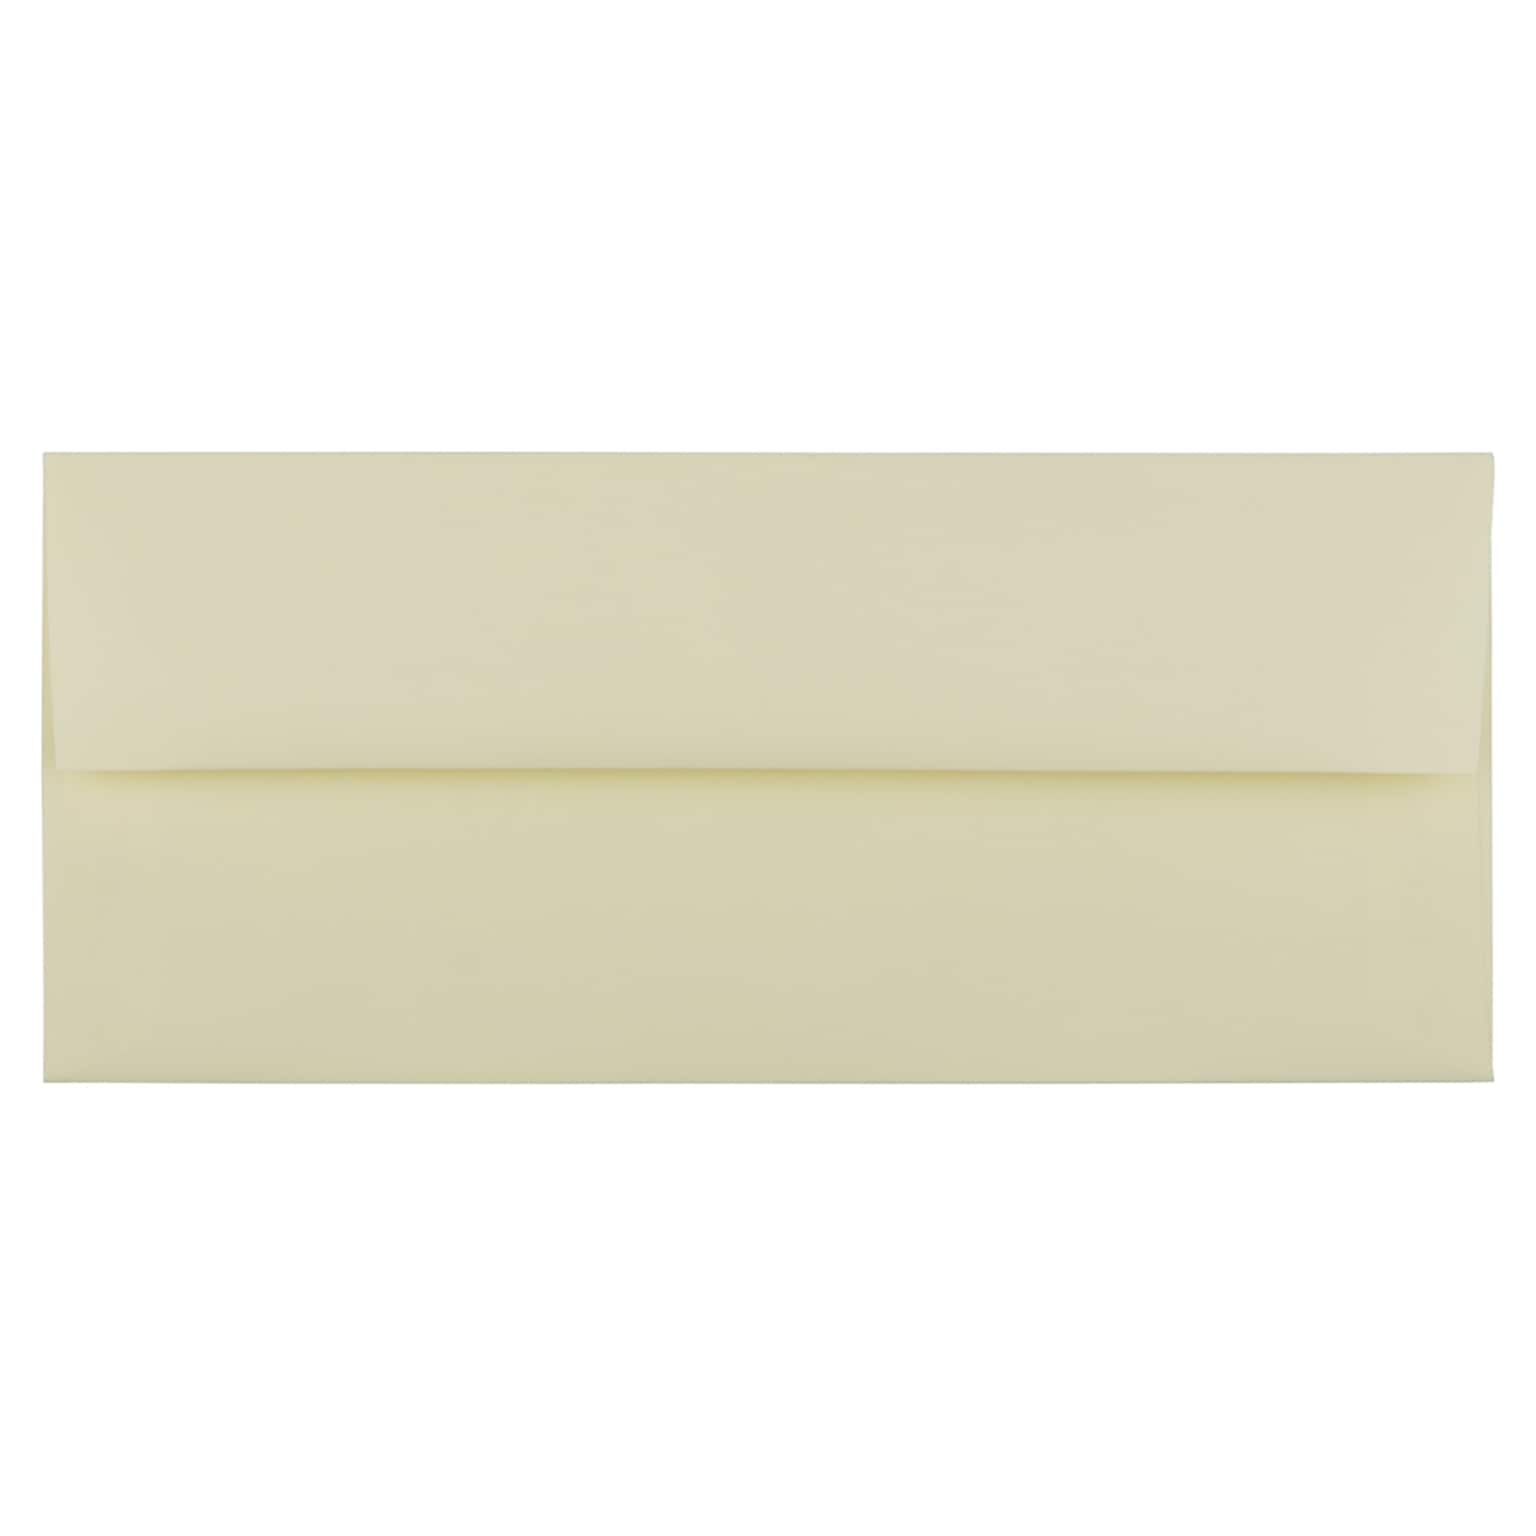 JAM Paper Strathmore Open End #10 Business Envelope, 4 1/8 x 9 1/2, Ivory Wove, 500/Pack (191165H)